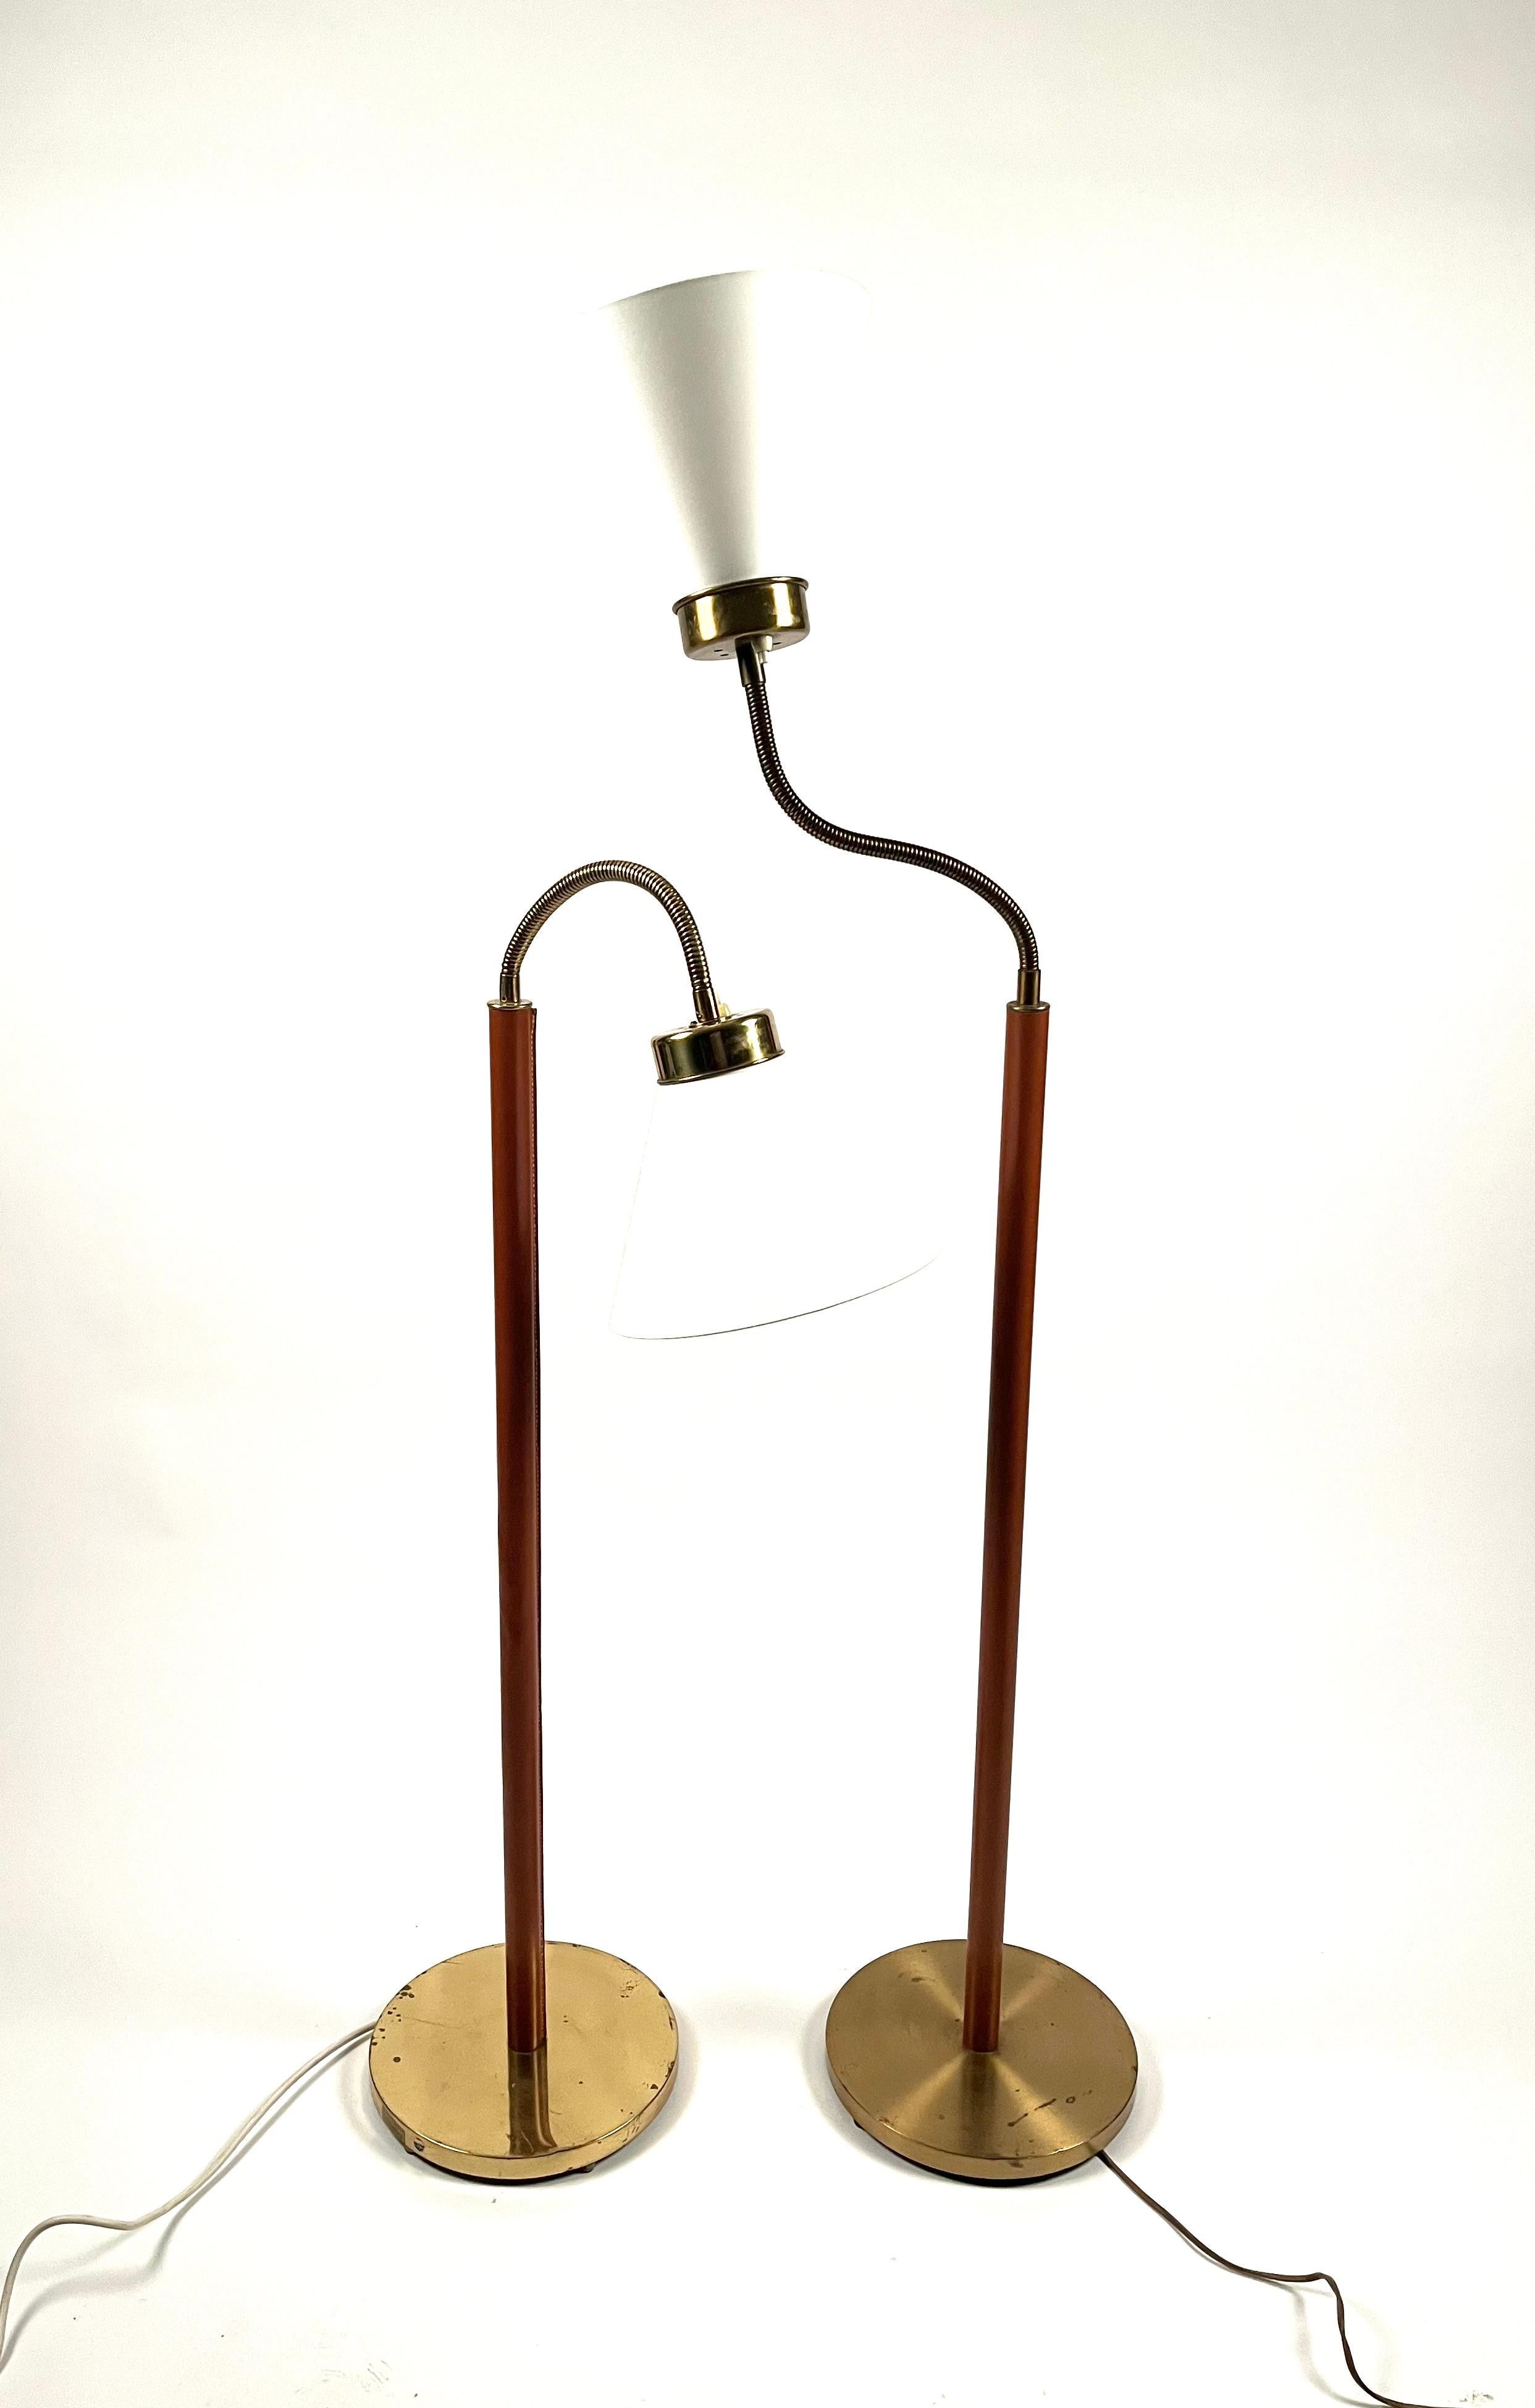 Two 1838 Floor lamps designed by Josef Frank  1934 for iconic Swedish company Firma Svenskt Tenn in Stockholm.
Brass frame with cognac leather.
Different heights on lamps. One is 5 cm longer then the other.
New original white lampshades from Svenskt